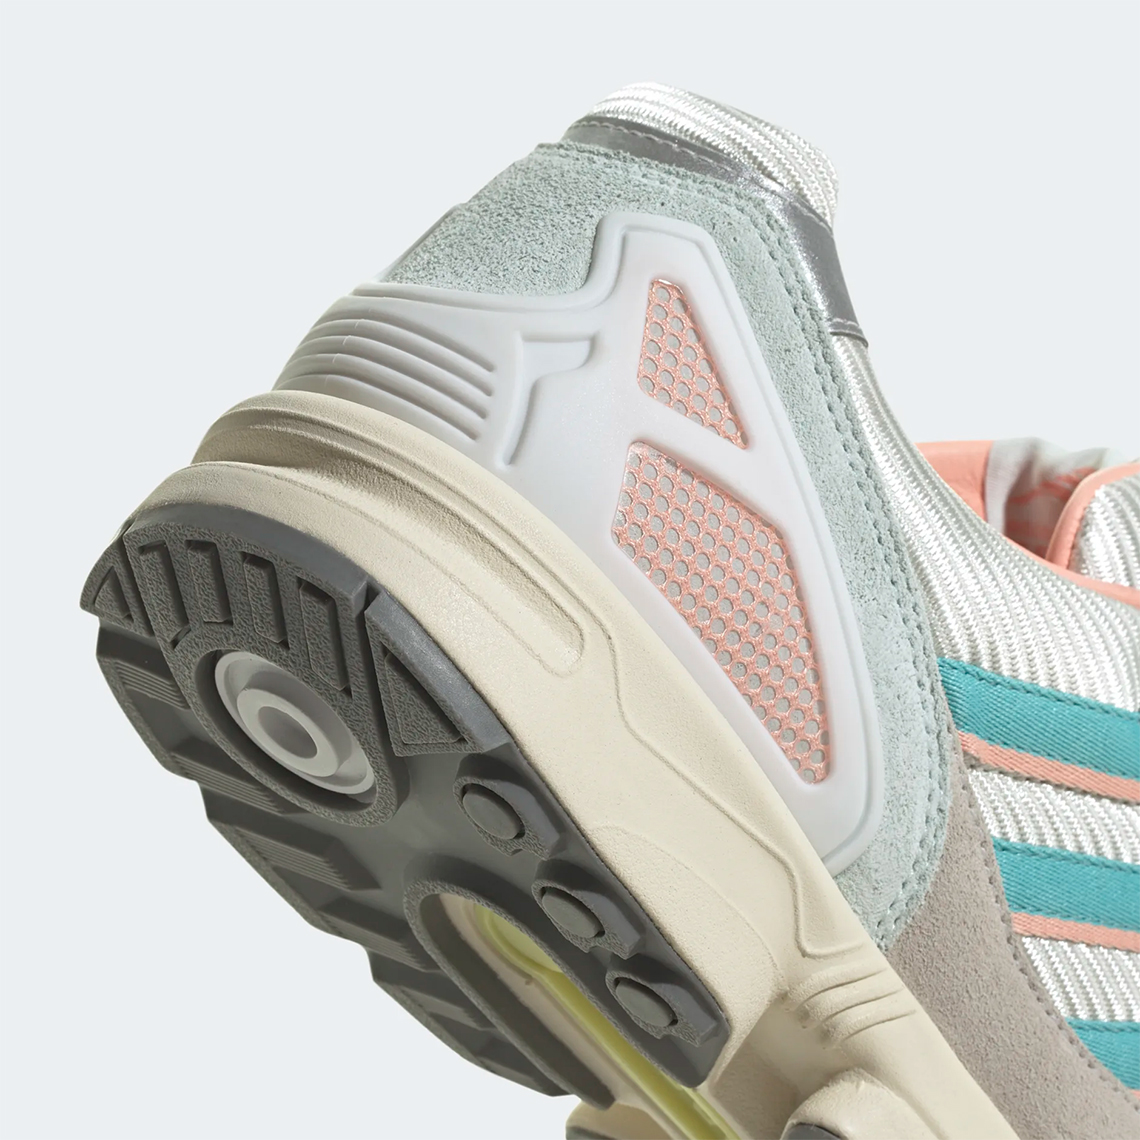 Adidas Zx 8000 Ice Mint Trace Pink Cream White If5382 1